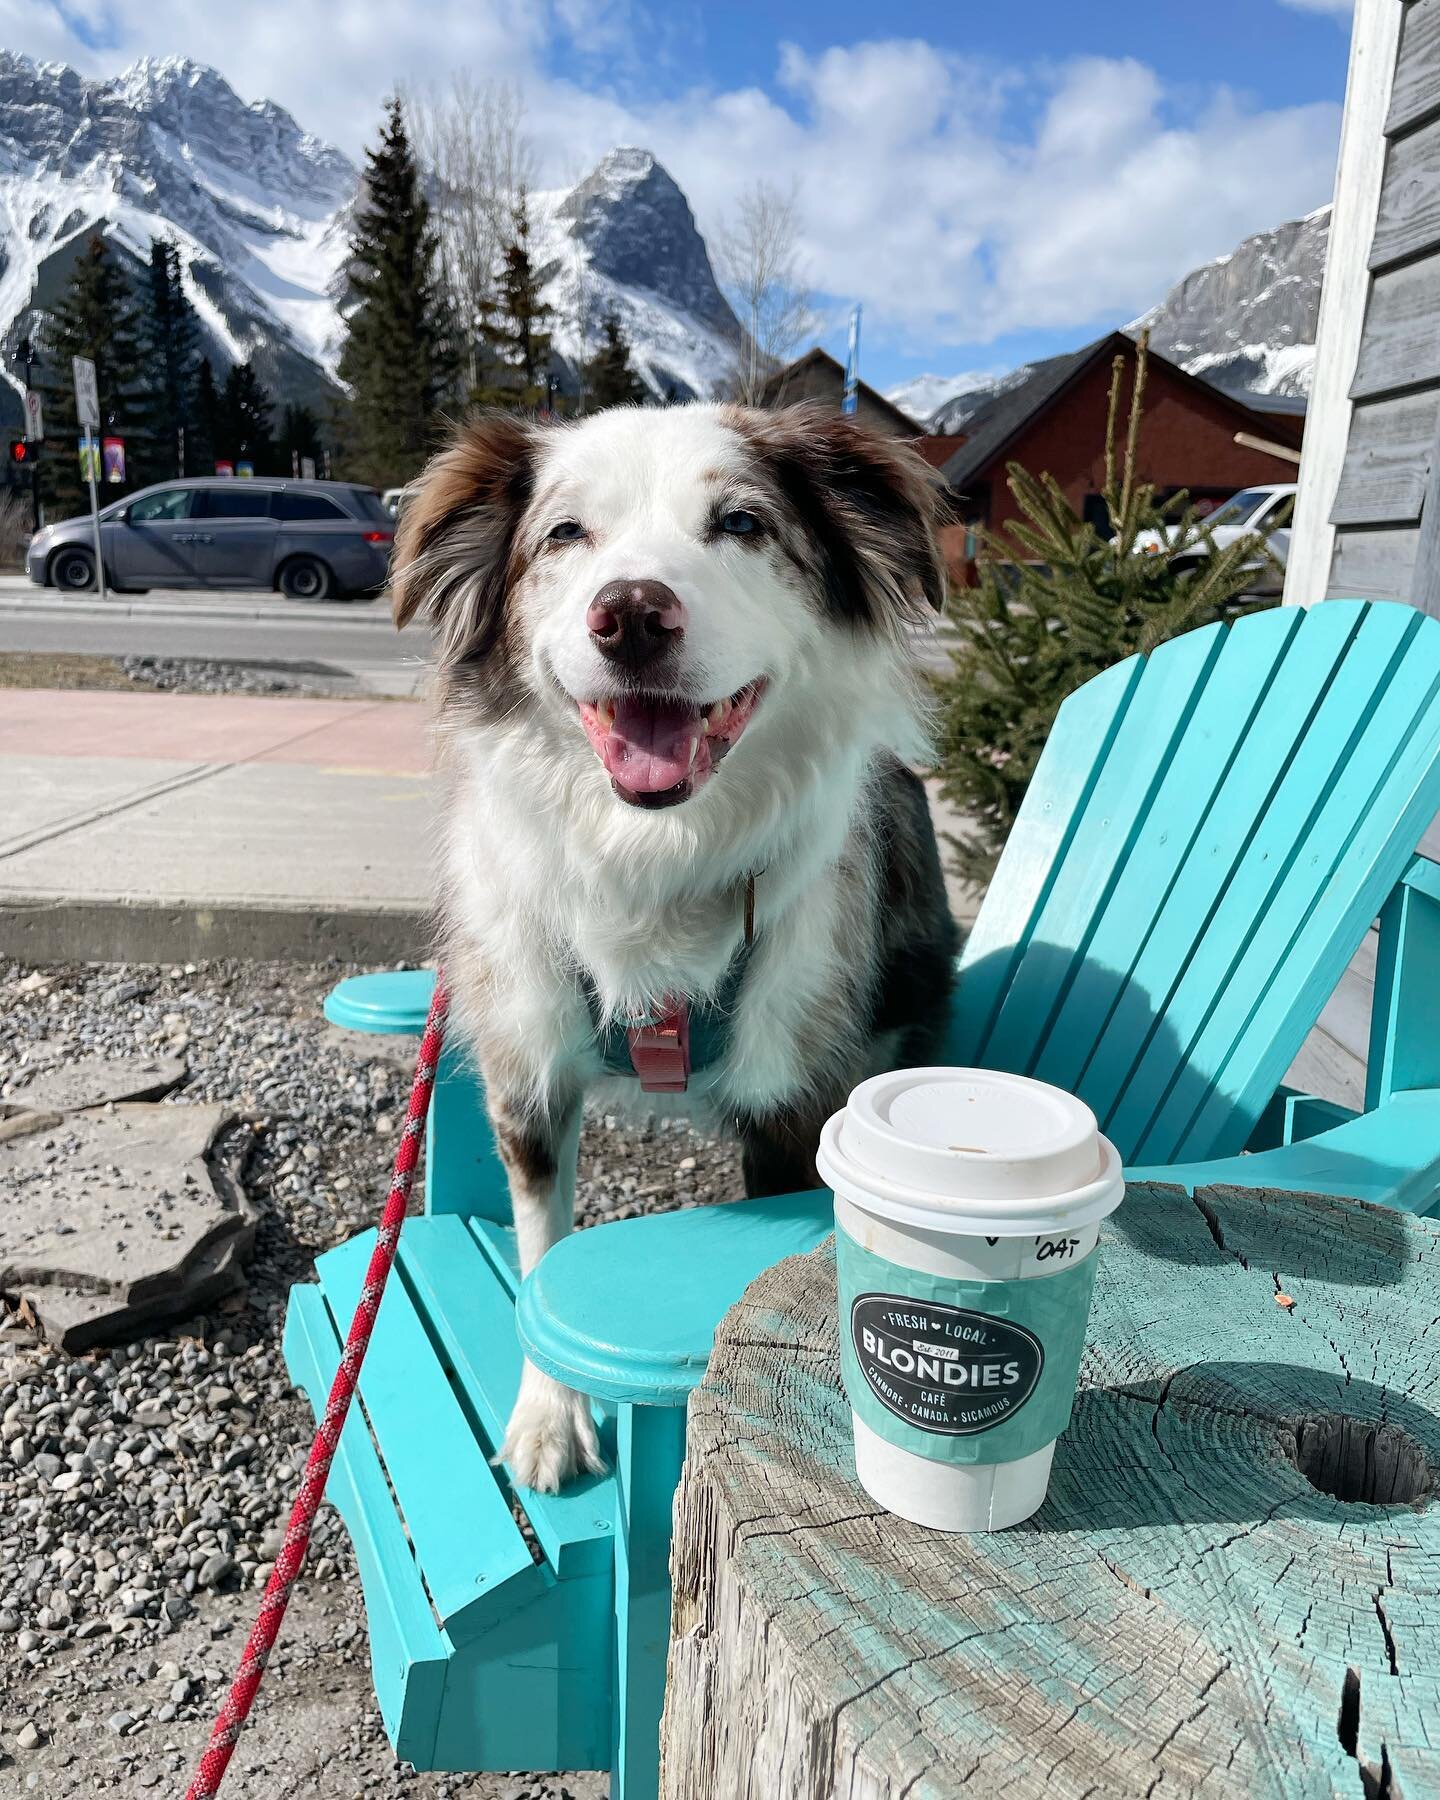 Name a better combo&hellip;we will wait ☺️Friday, coffee and mountains 💛☕️ 🏔️ #haveablondemoment 
.
.
.
.
#canmore #coffee #coffeeholic #coffeelover #canmorealberta #cutecafe #localbusiness #supportlocal #lattegram #downtowncanmore #dogsofinstagram